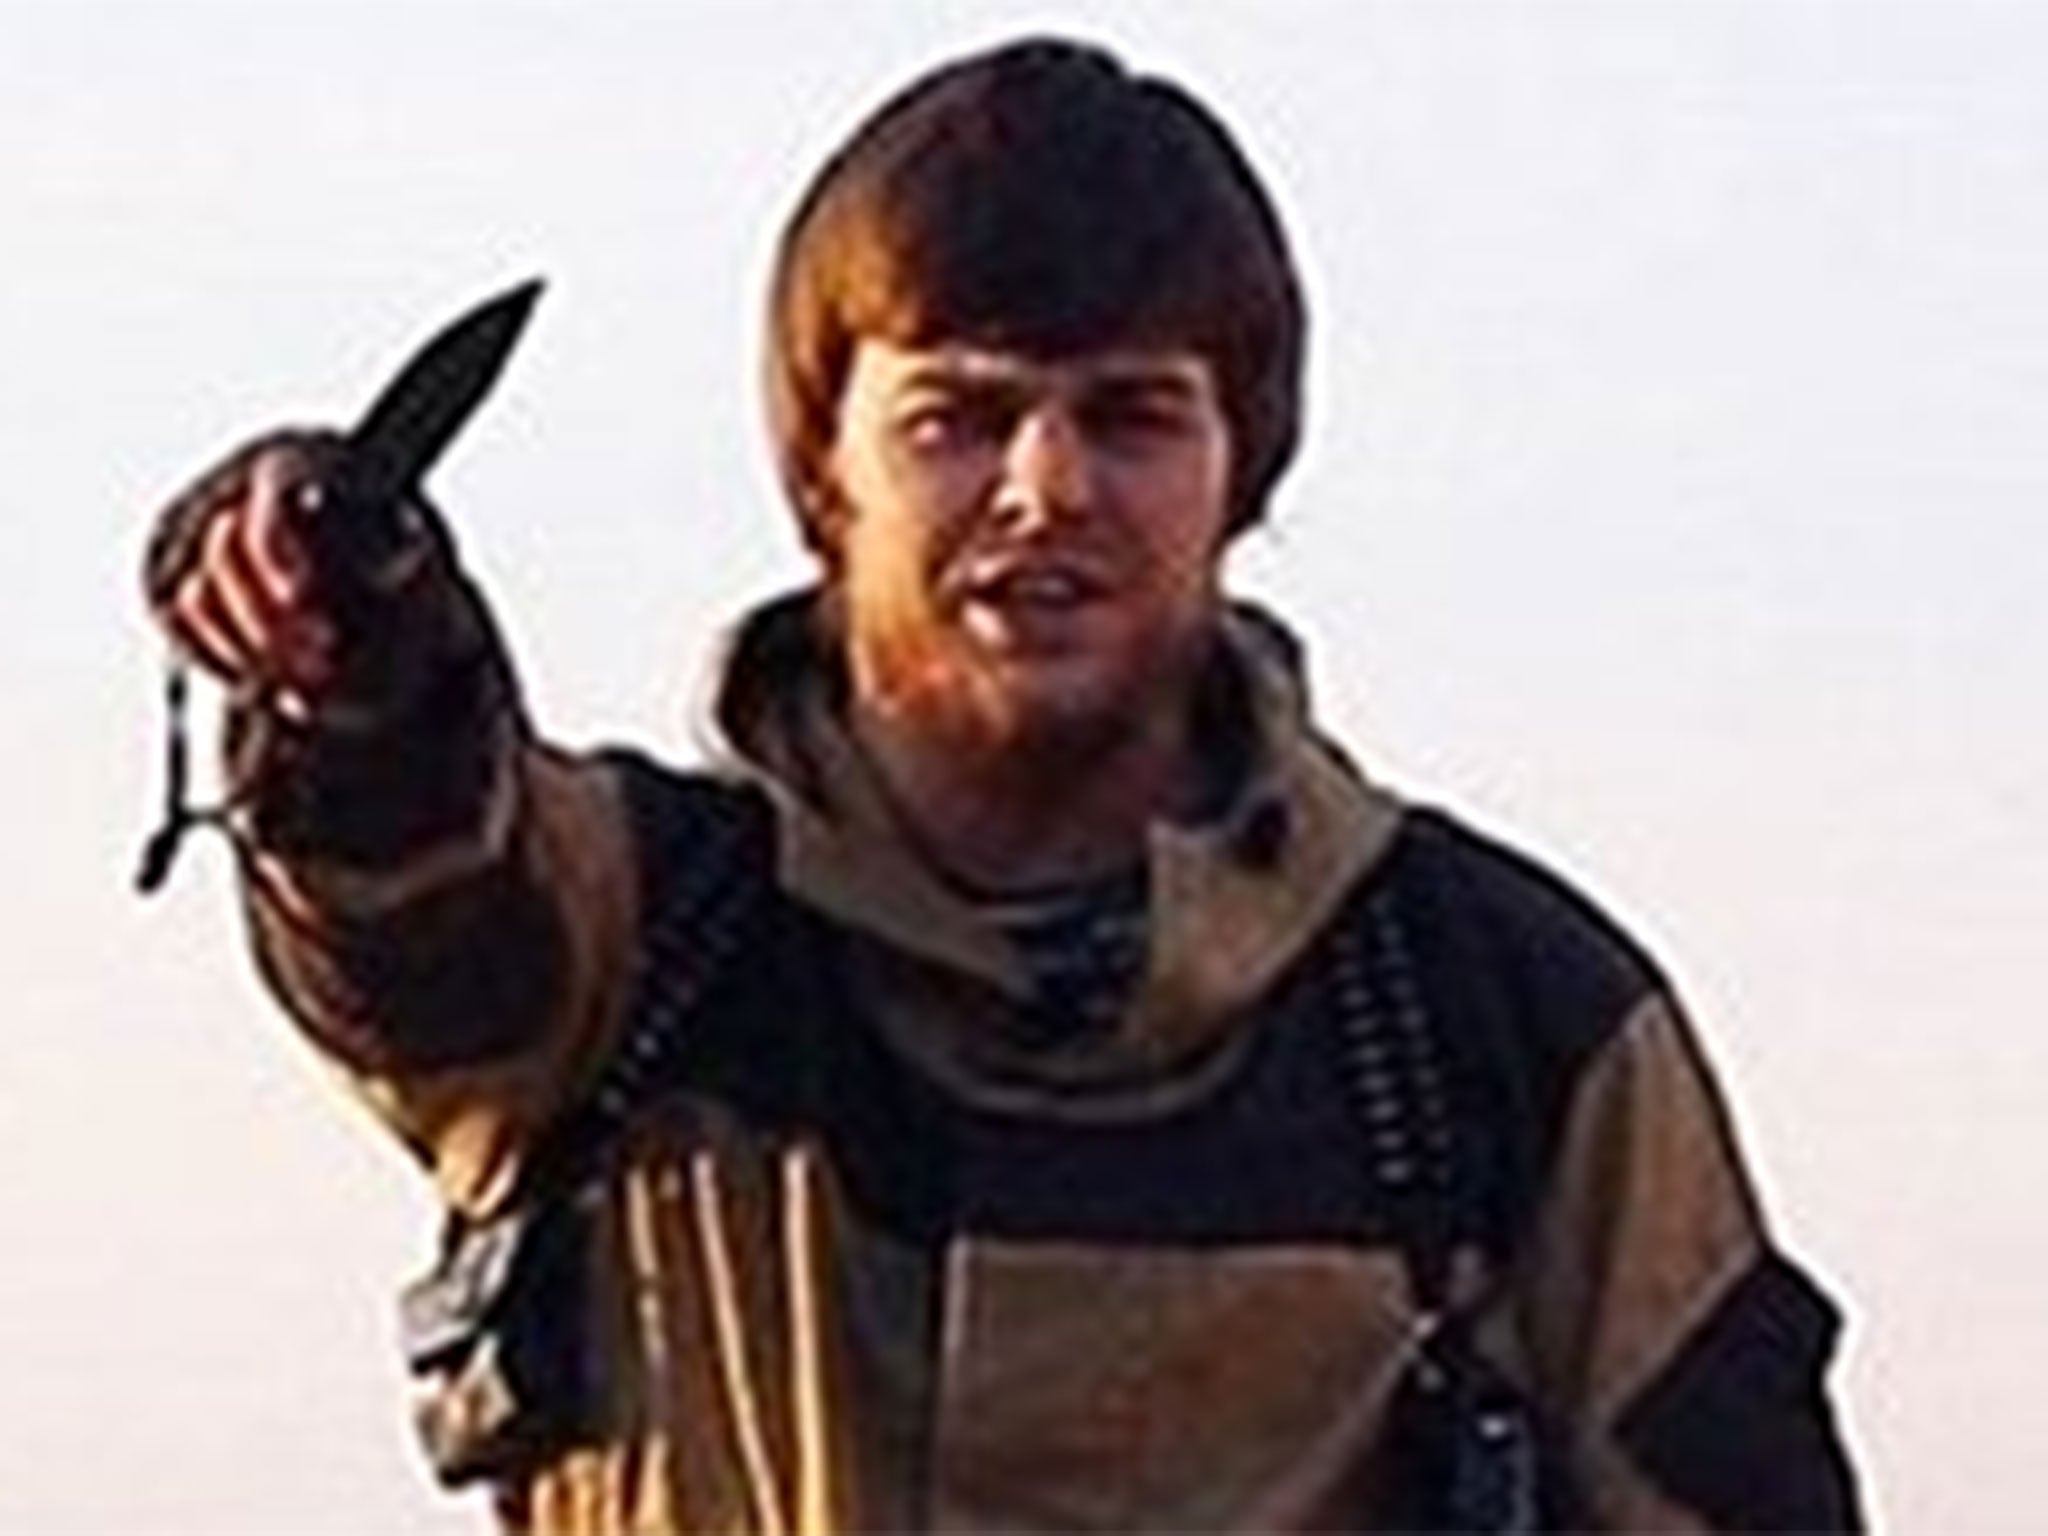 Russian-born Isis fighter Anatoly Zemlyanka has become one of Moscow's most-wanted after he apparently executed a countryman for a video in Syria